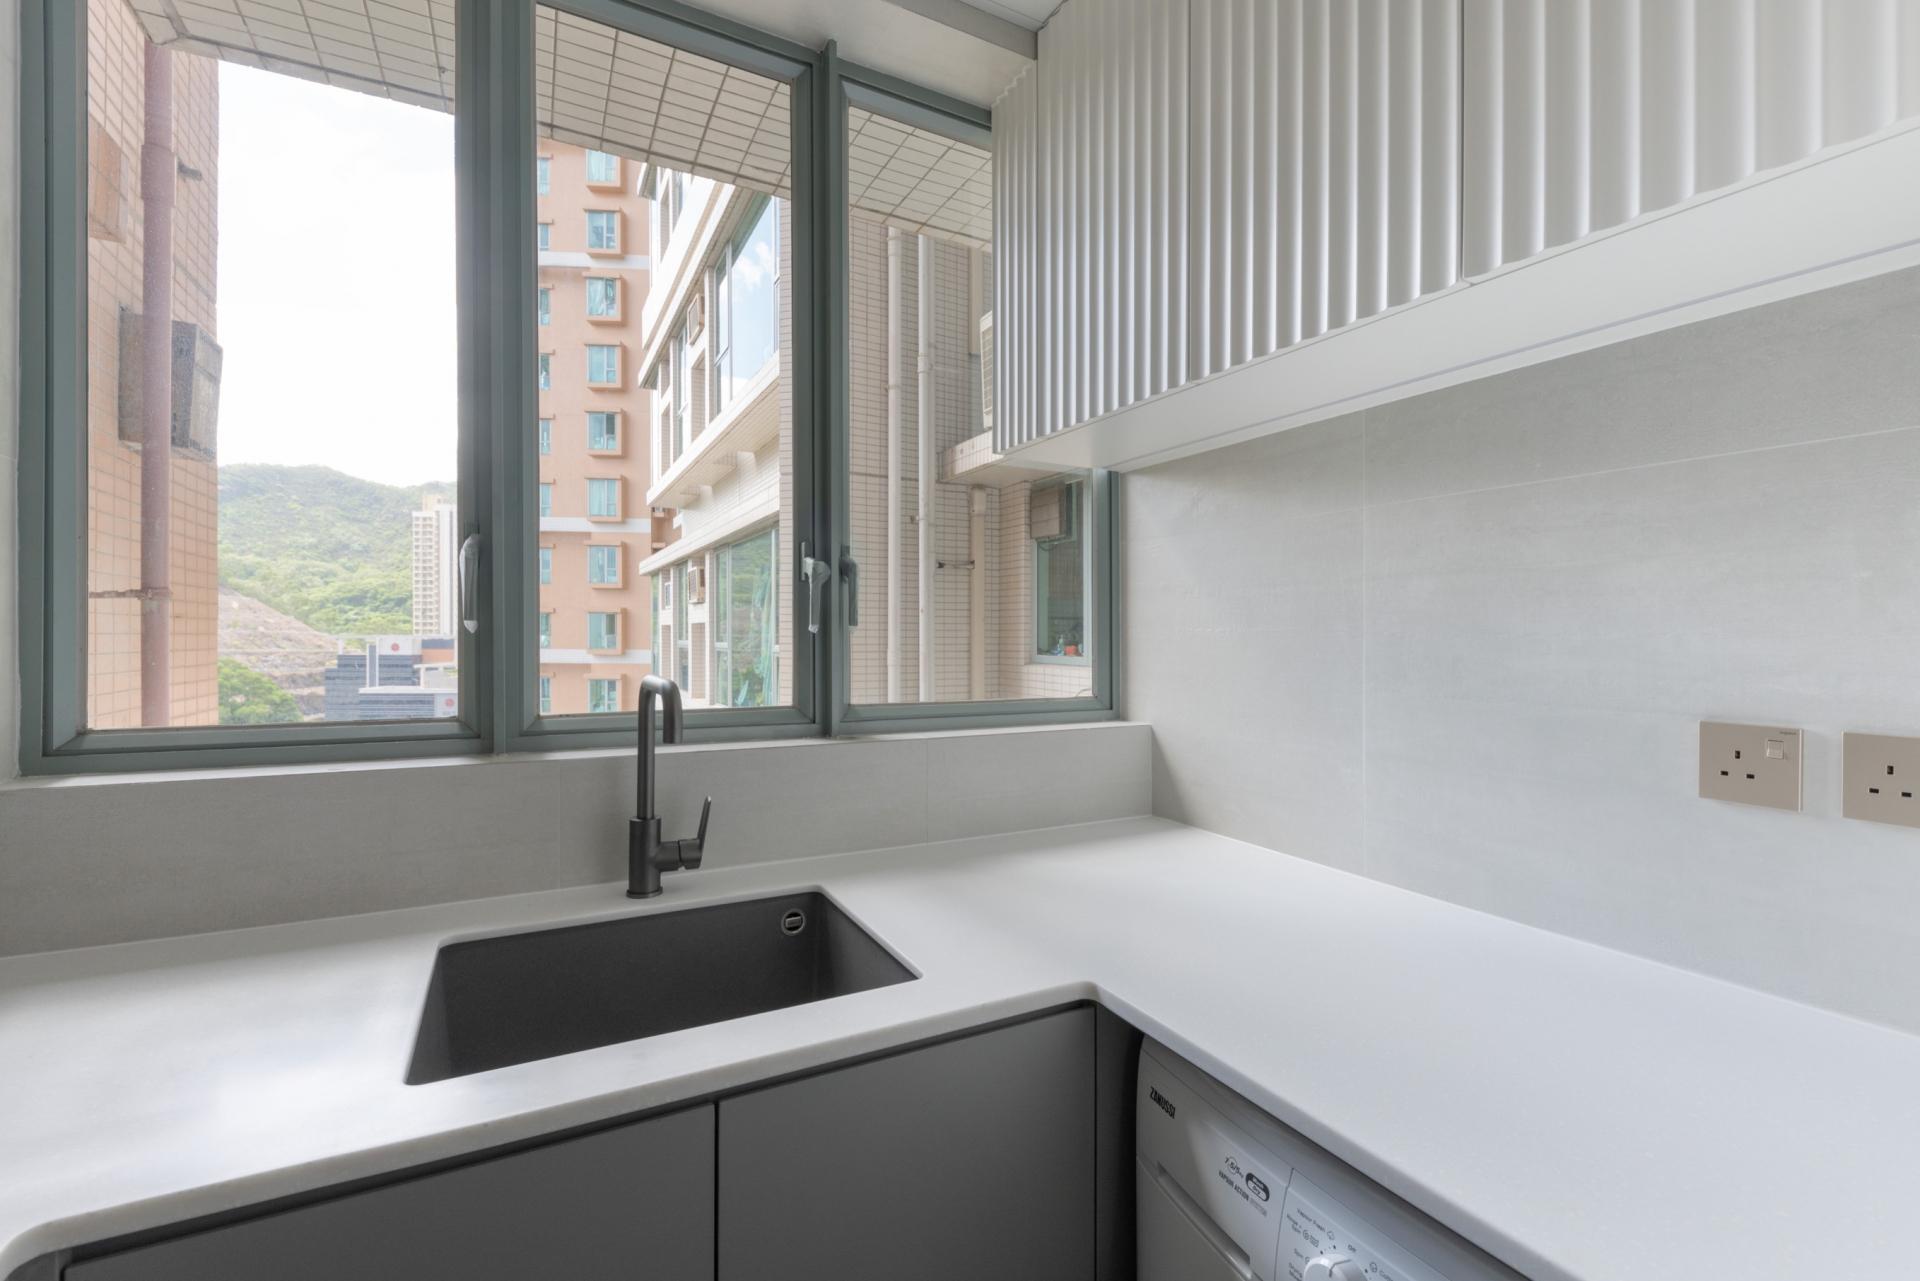  This 498 sq. ft. Japandi-style apartment in Tiu Keng Leng is a picture of serenity